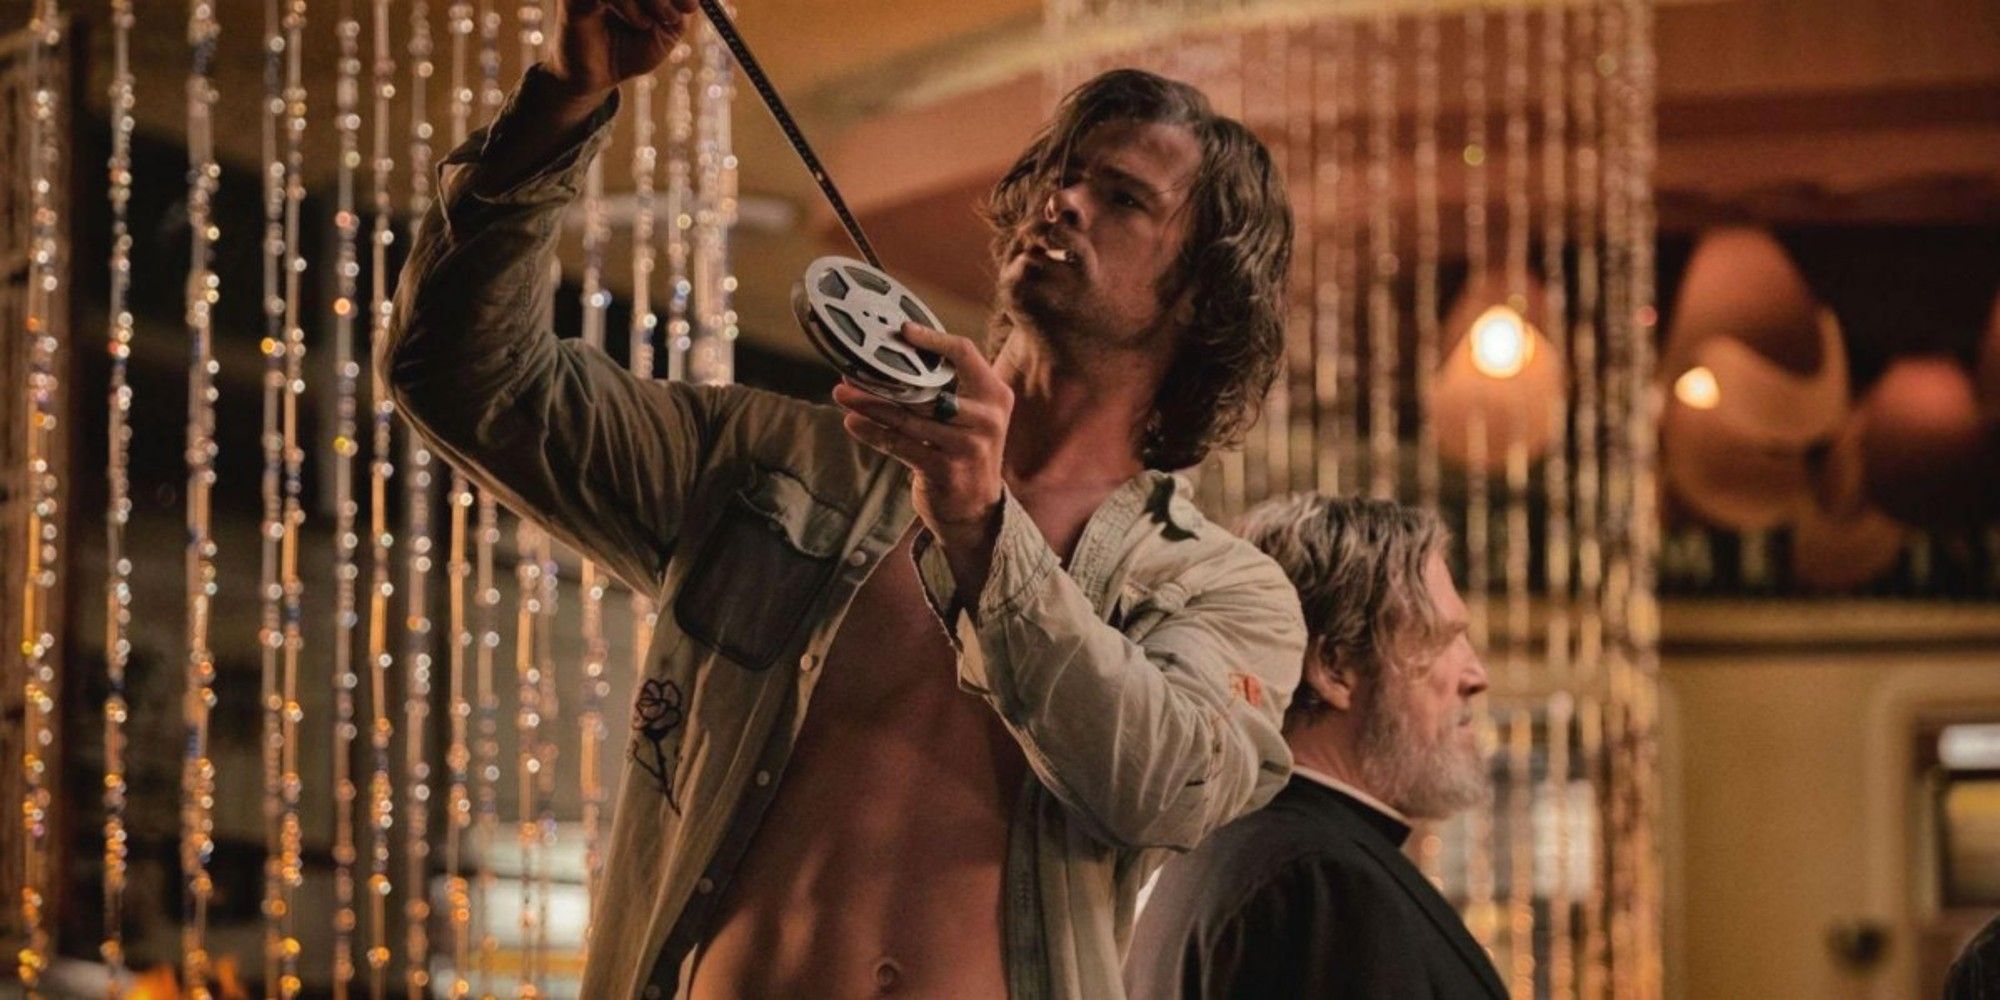 The cult leader in Bad Times at the El Royale